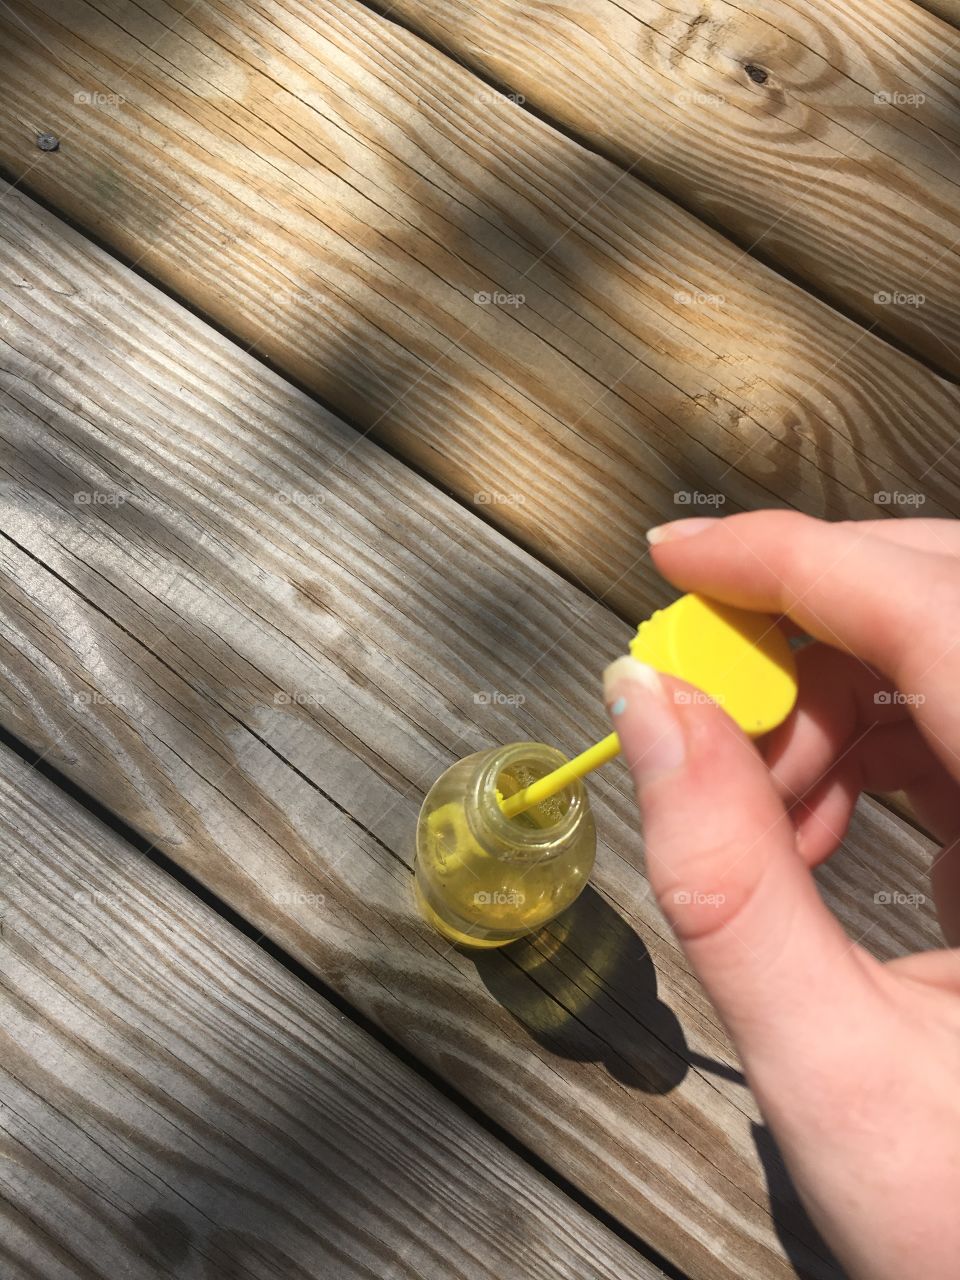 Taking out bubble wand of yellow soda bottle container